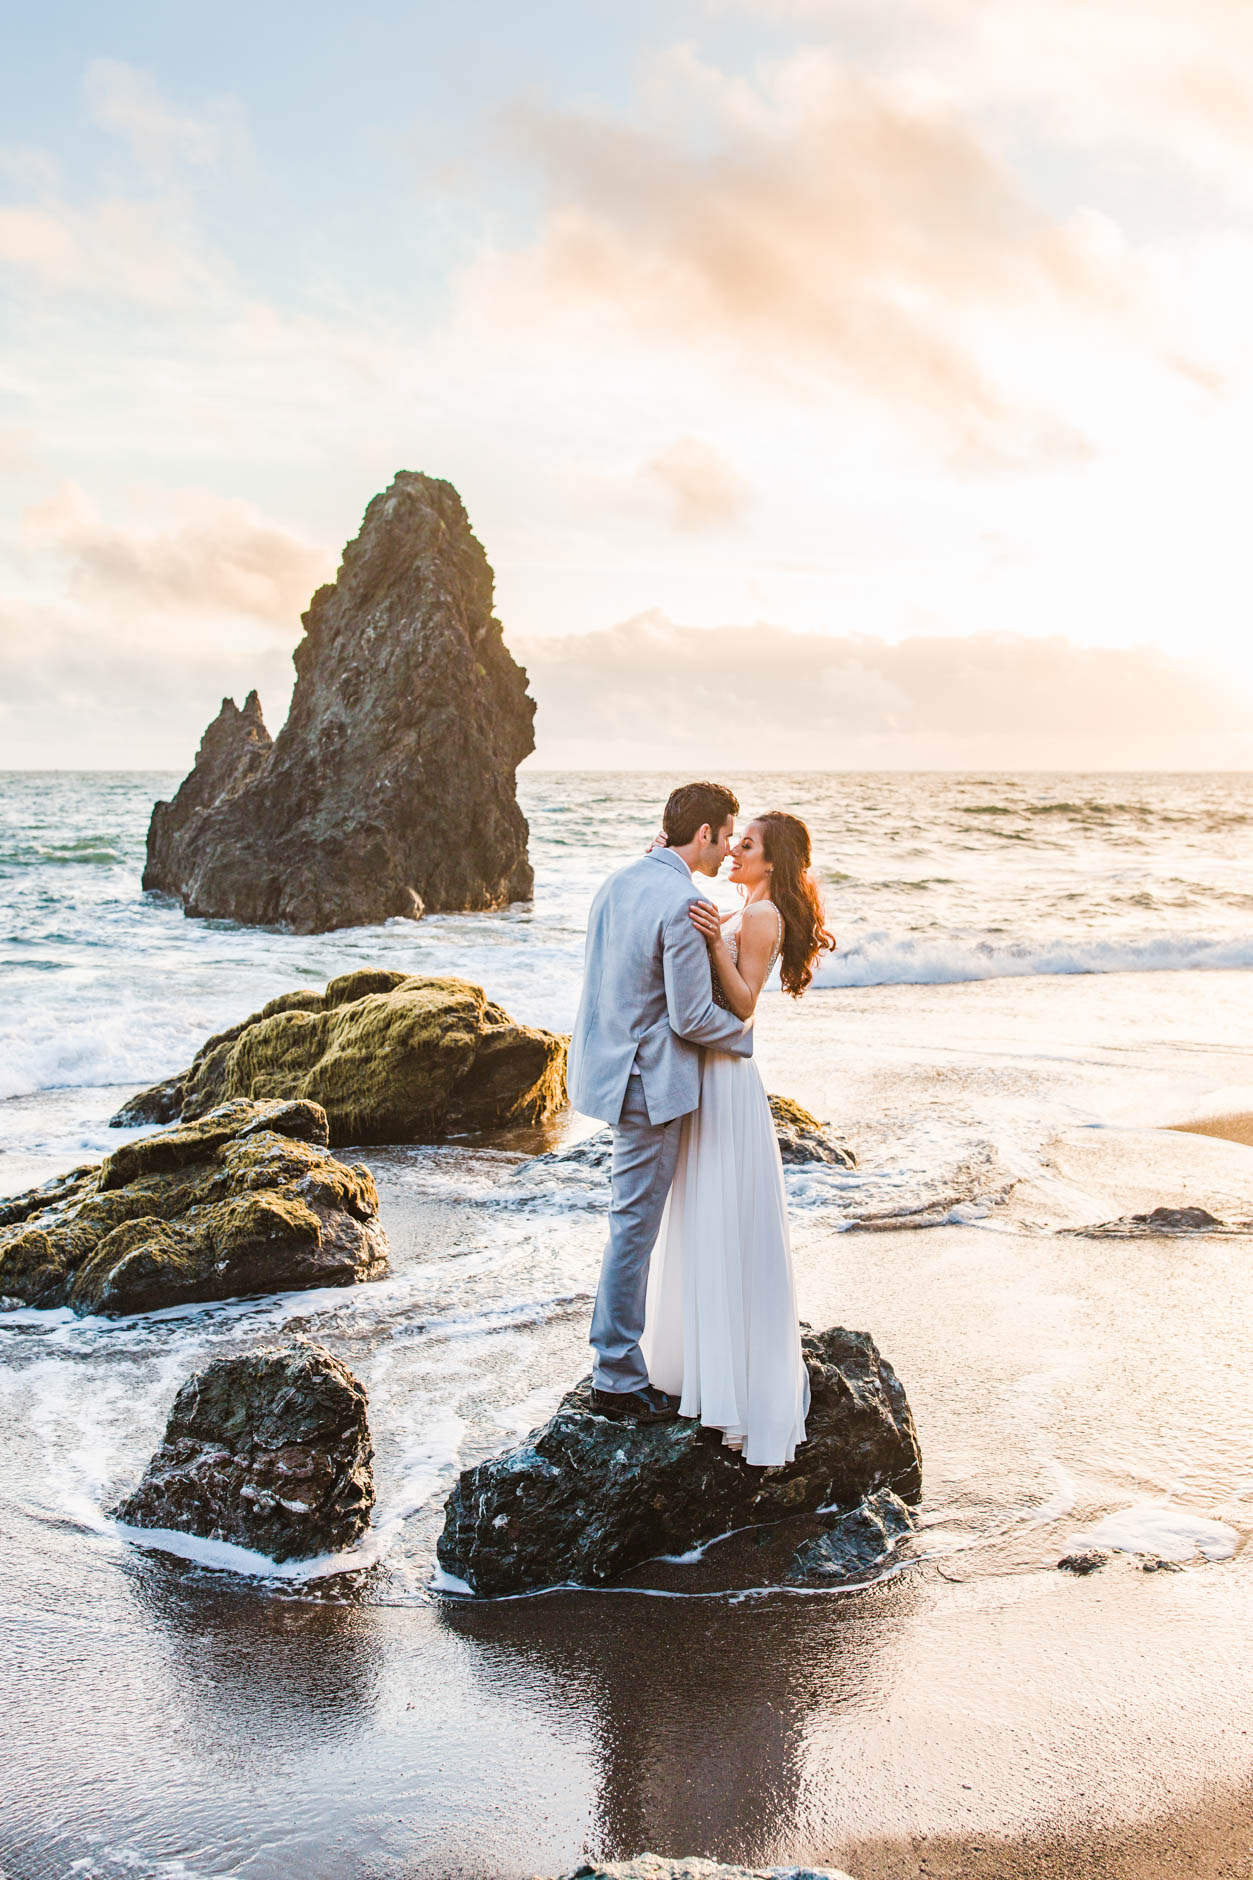 Bride and Groom standing on rock on beach at sunset